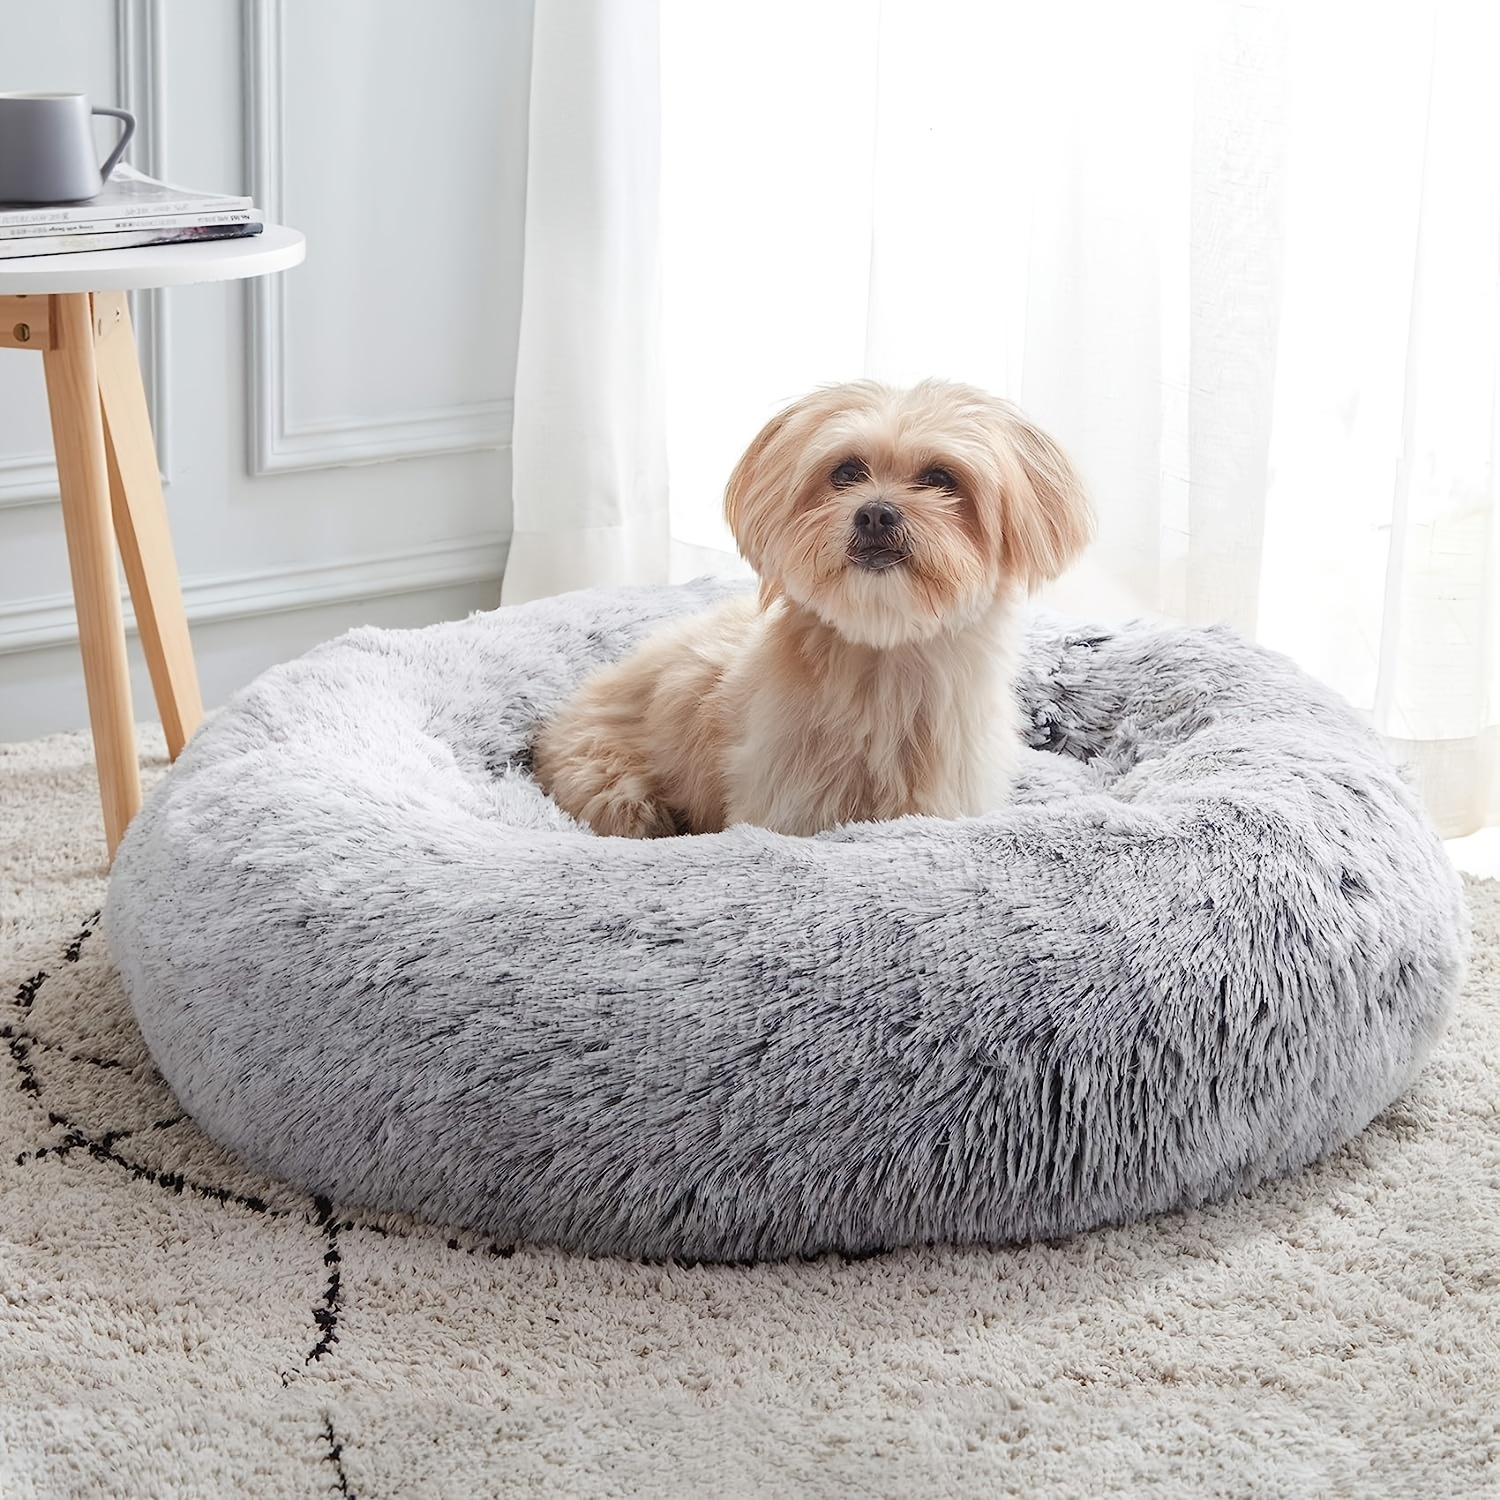 

Dog Bed, Round Donut Cuddler Warming Cozy Soft Bed, Faux Fur Plush Cushion Bed For Small Medium Dogs And Cats